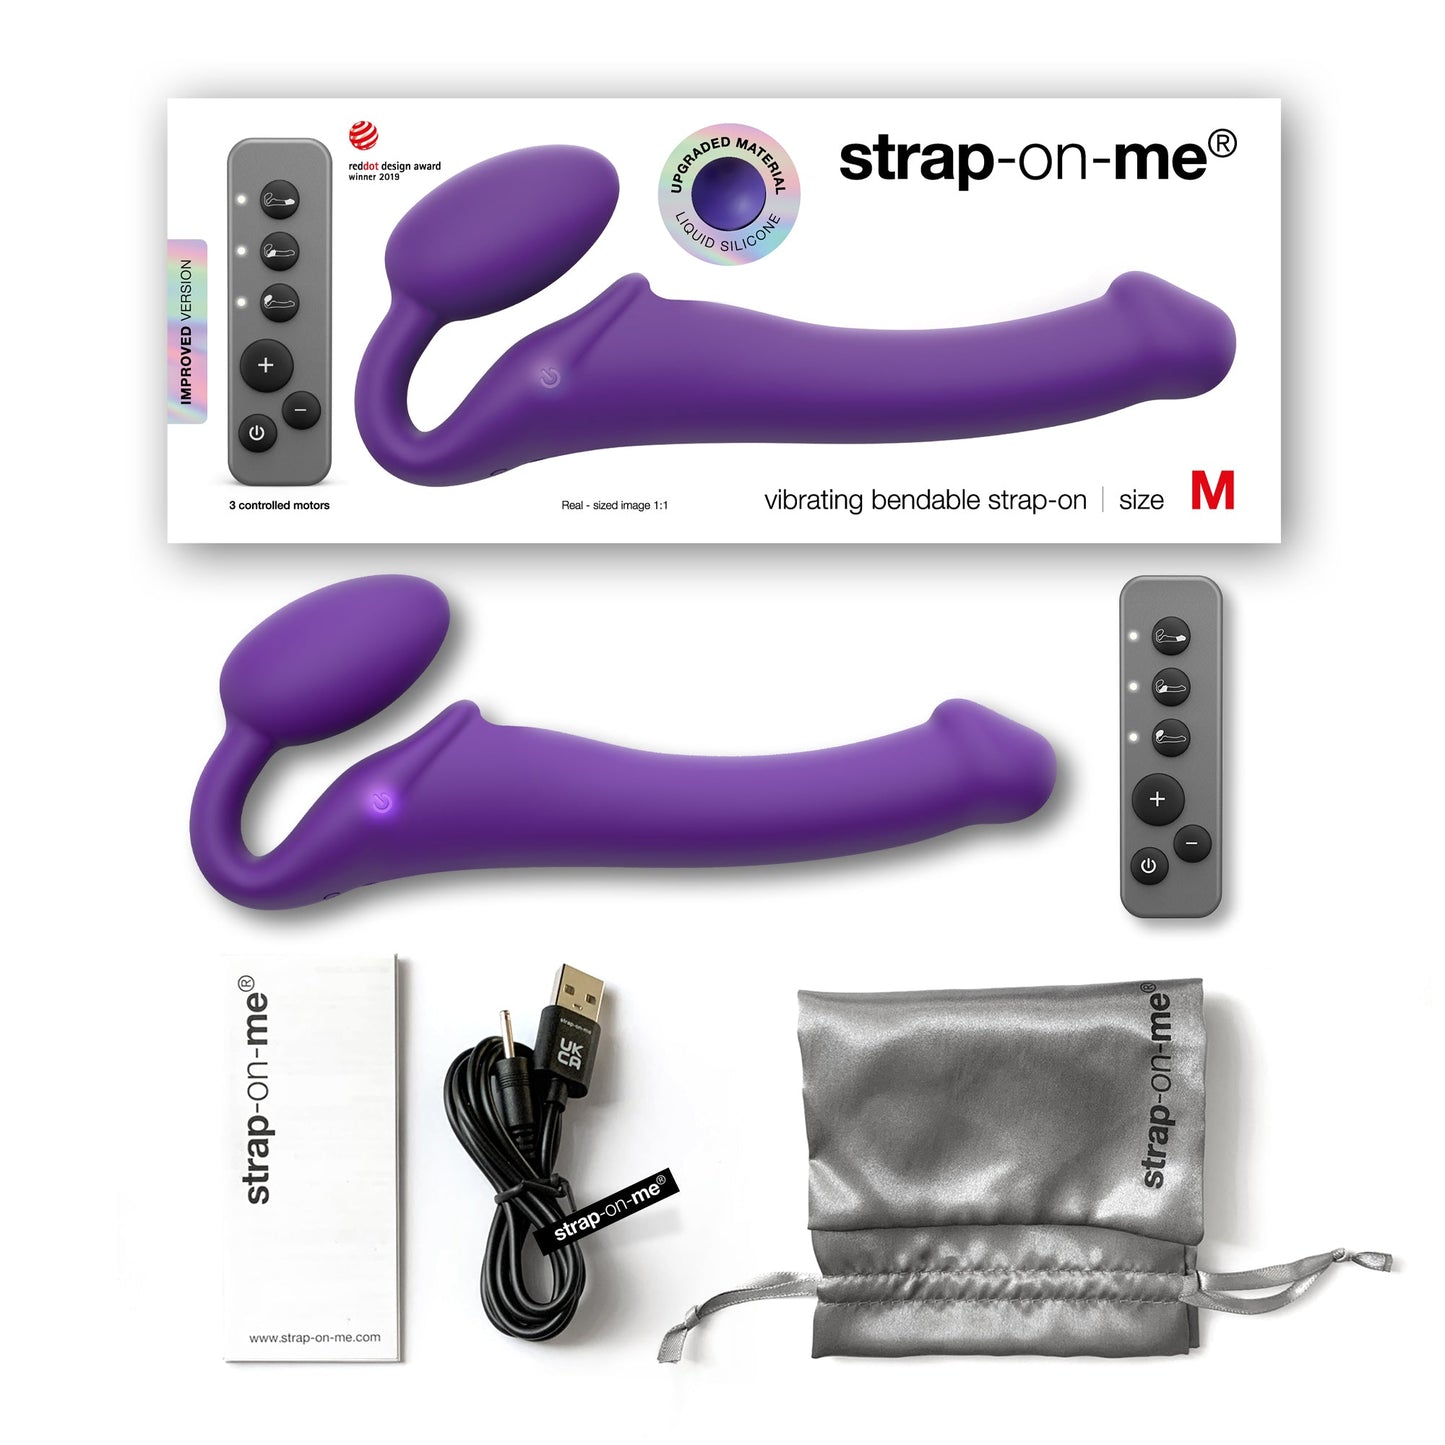 Strap On Me Vibrating Strap-on Remote Controlled 3 Motors - Purple